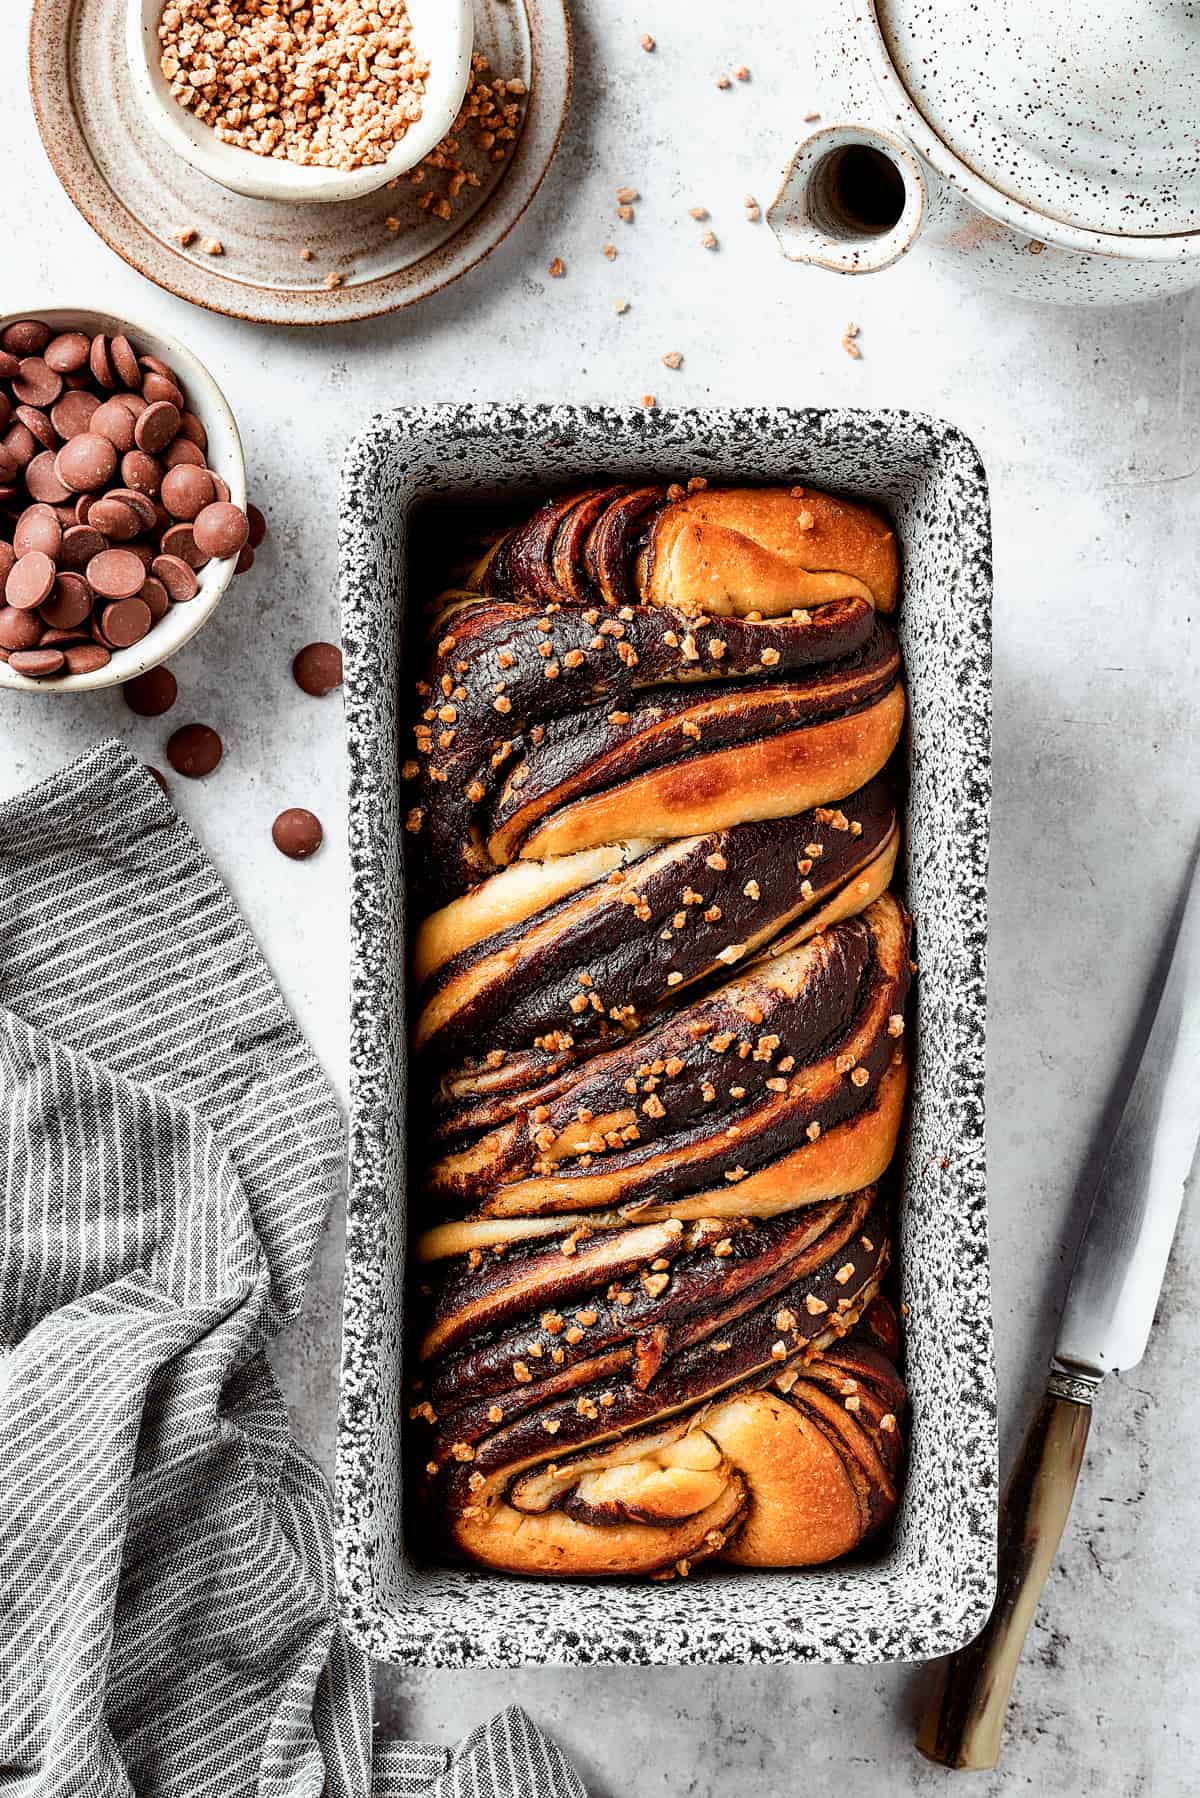 A baked chocolate babka in a loaf pan.